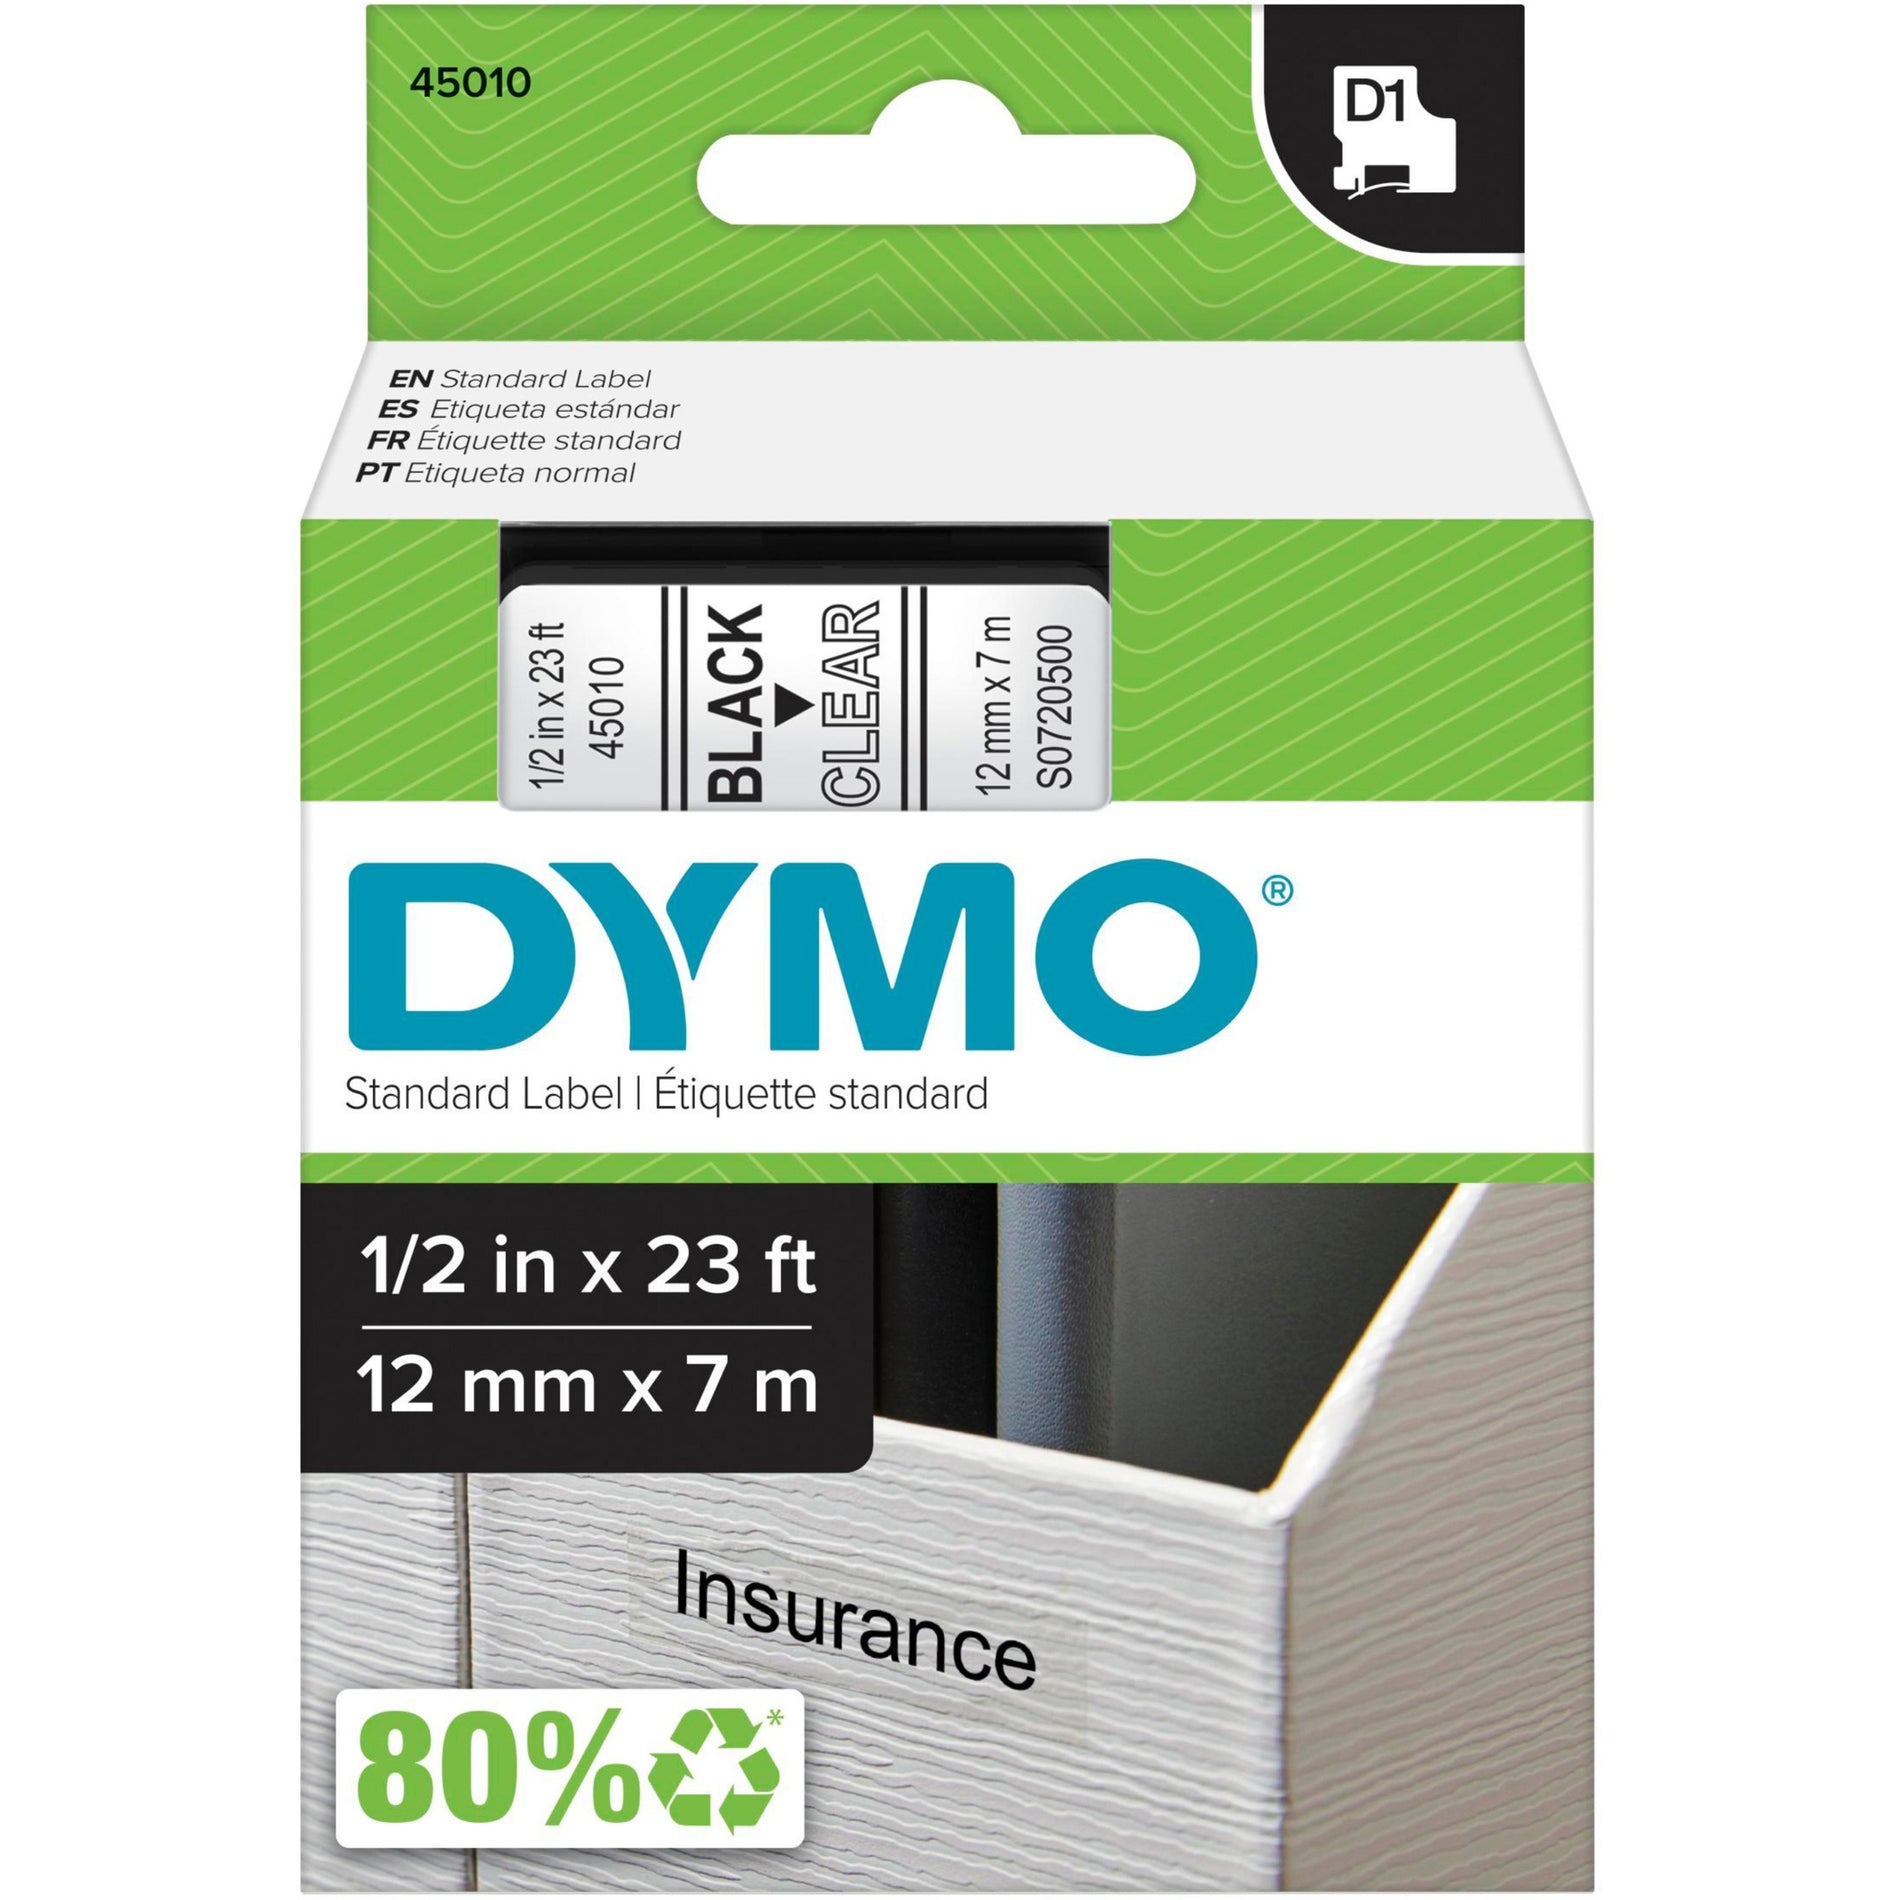 Dymo 45010 D1 Electronic Tape Cartridge, 1/2"x23' Size, Scratch and Chemical Resistant